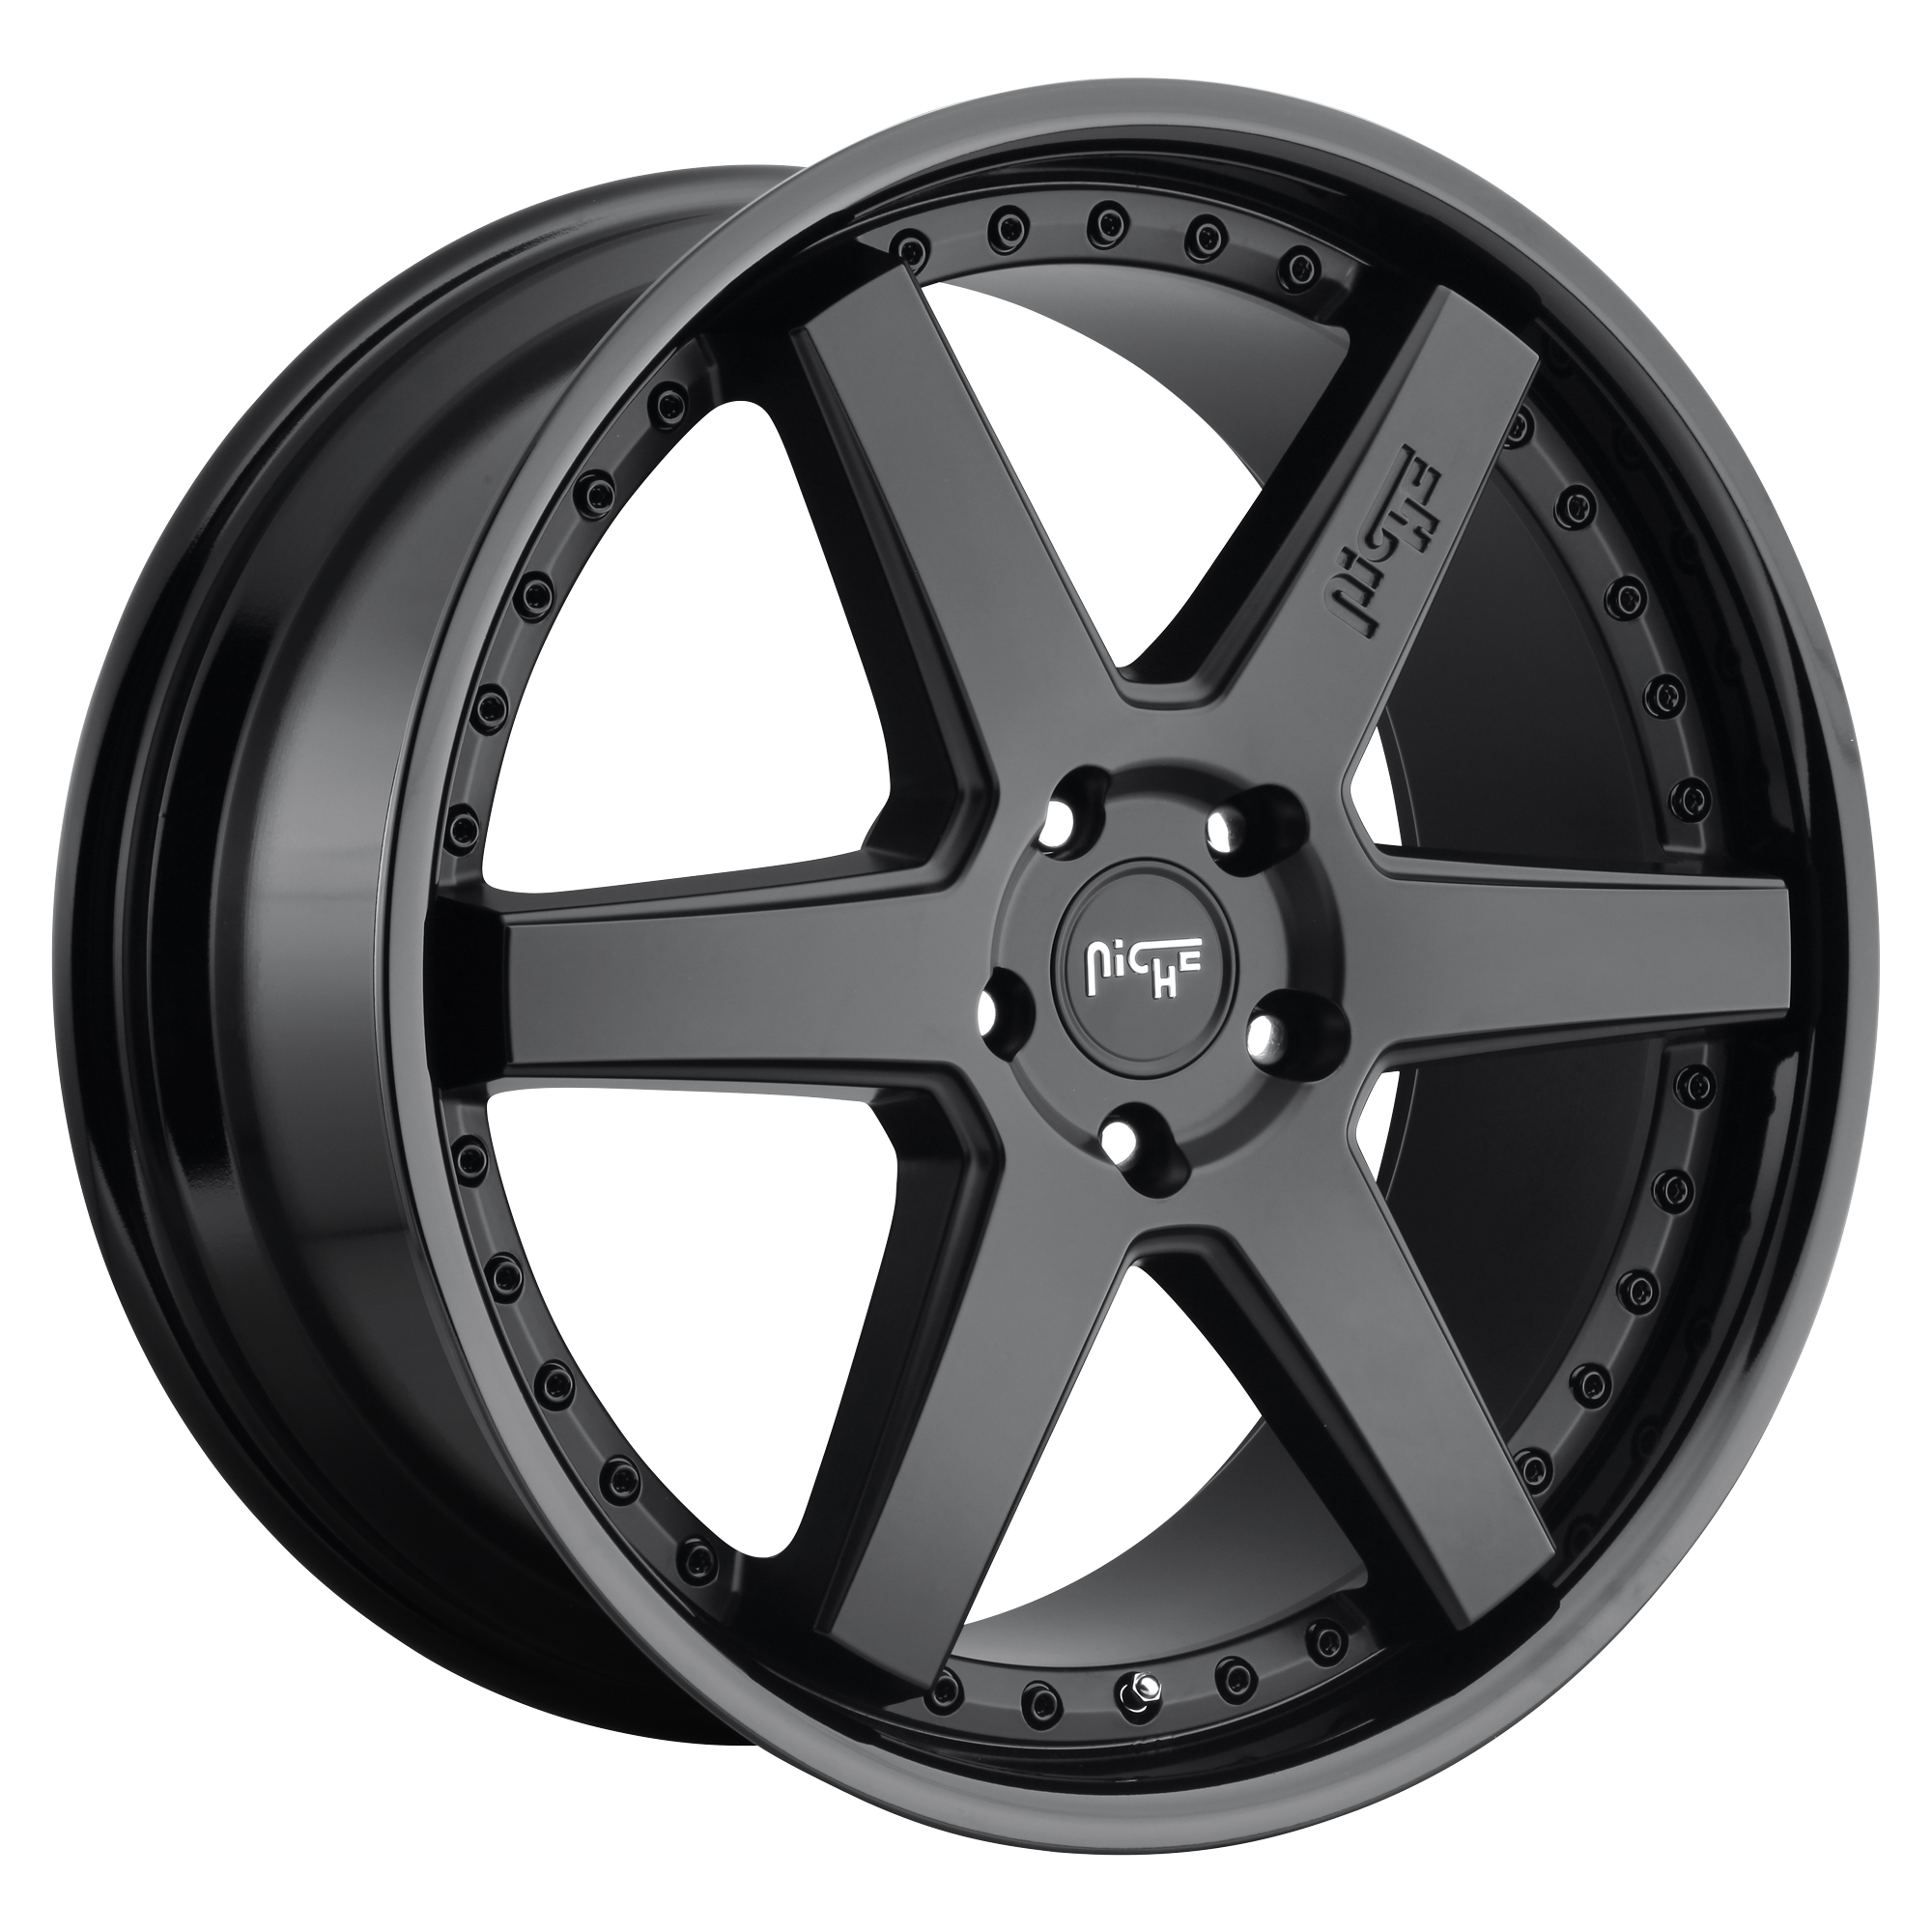 ALTAIR 19x10 5x120.00 GLOSS BLACK MATTE BLACK (40 mm) - Tires and Engine Performance